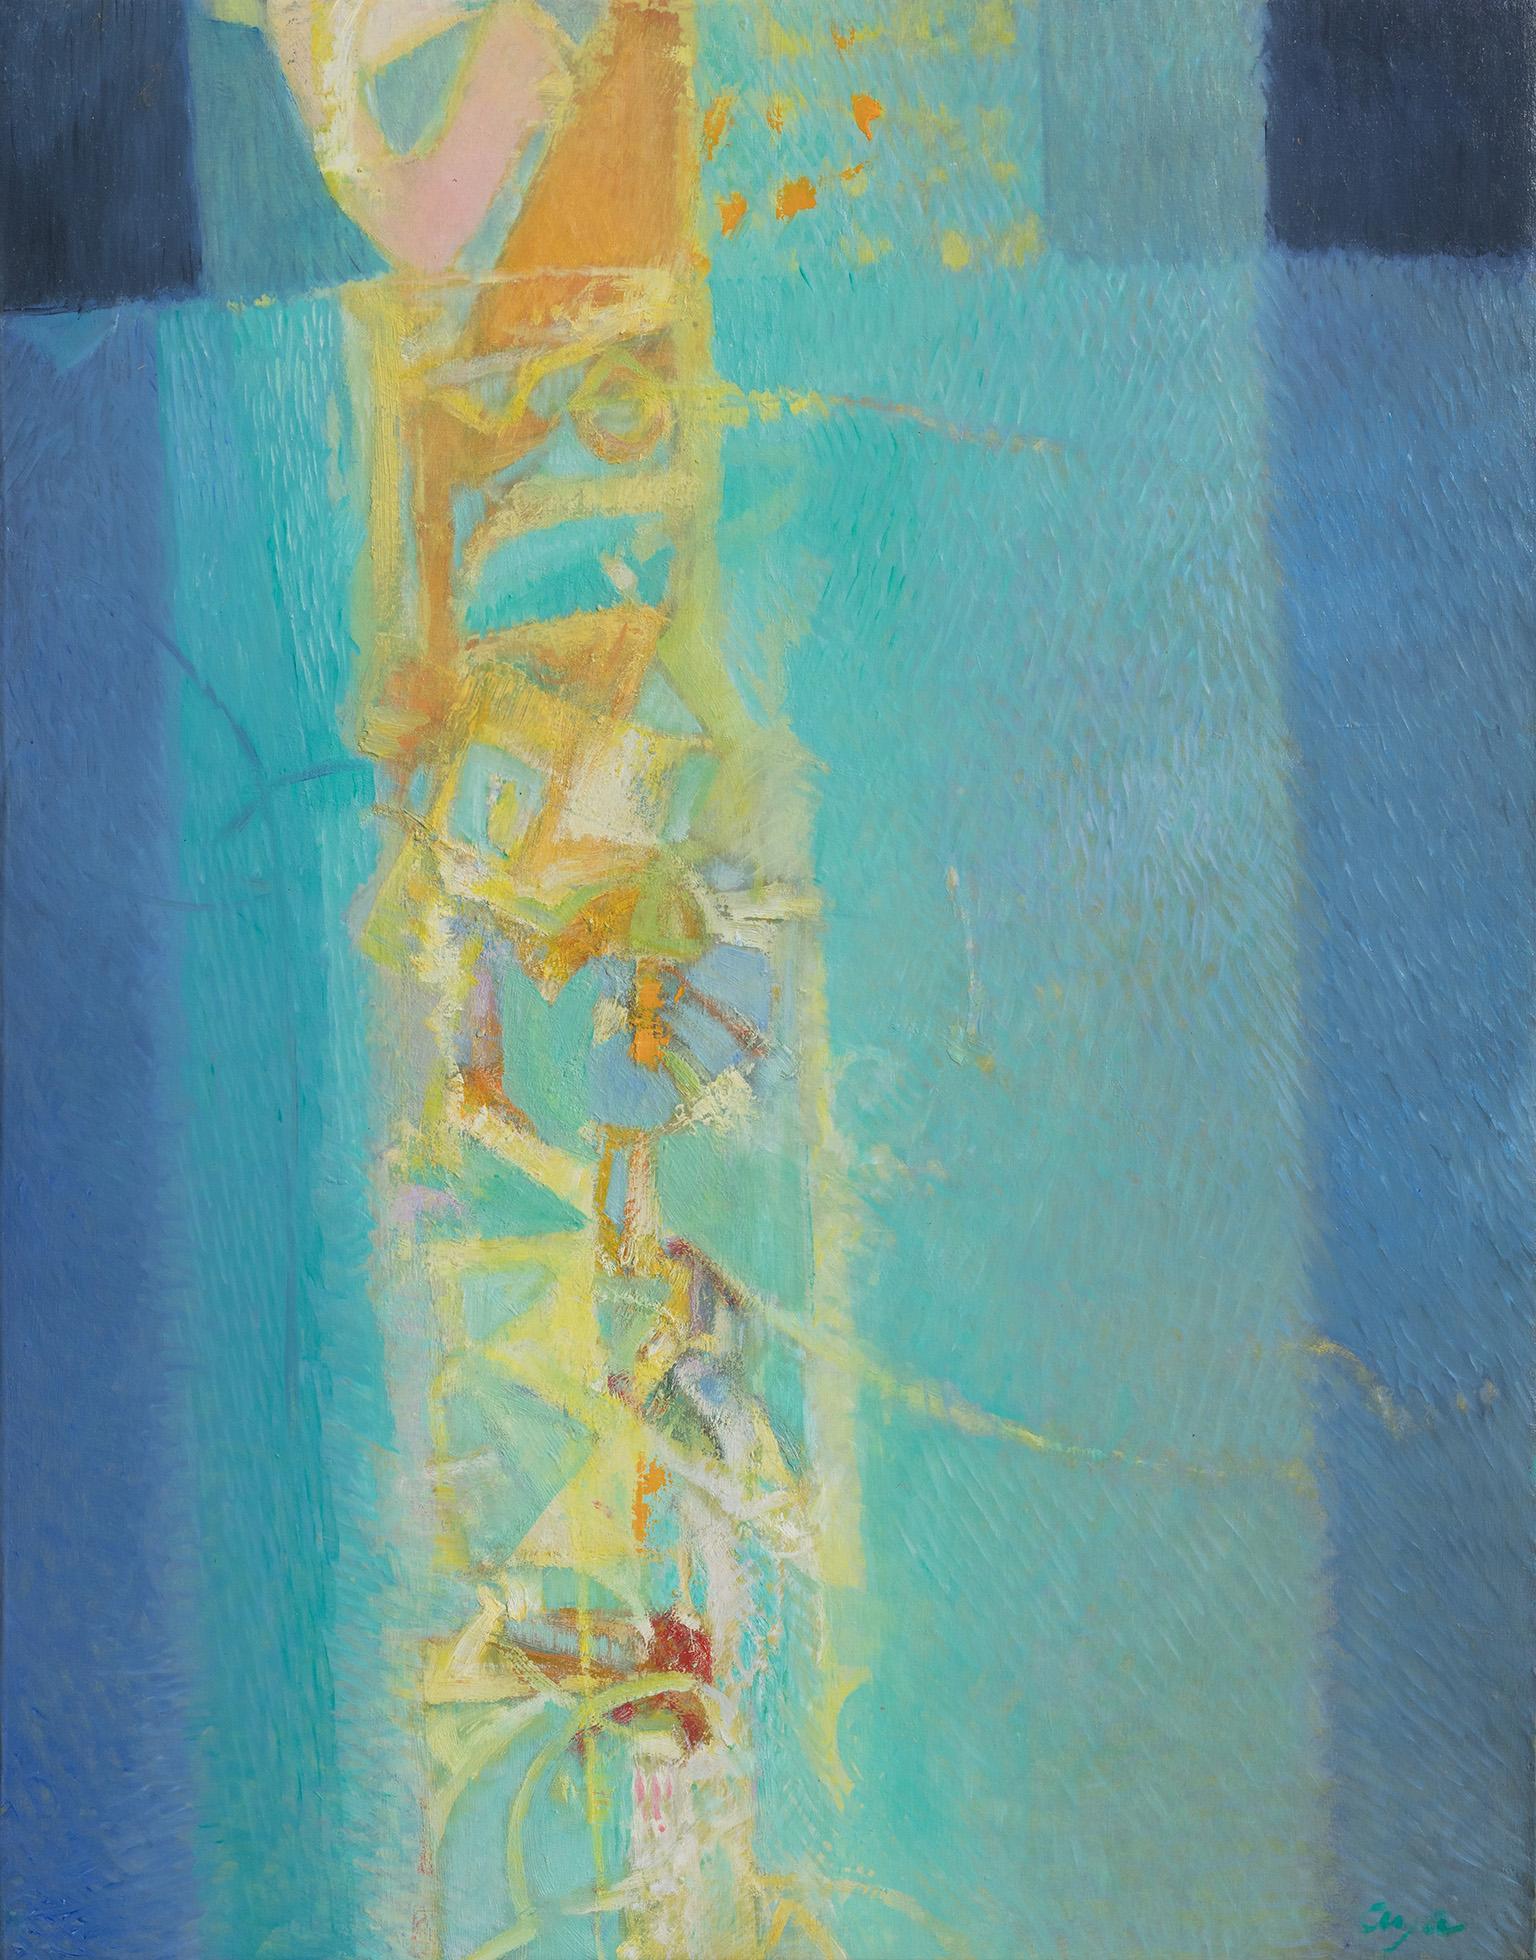 Alfredo Aya's Vitrales al Alba - Stained Glass Window at Dawn - is a 35 x 27.5-inch abstract oil painting on canvas. The primary colors are blue and turquoise. The image seems to be illuminated by an internal light. Aya broke the colors into odd